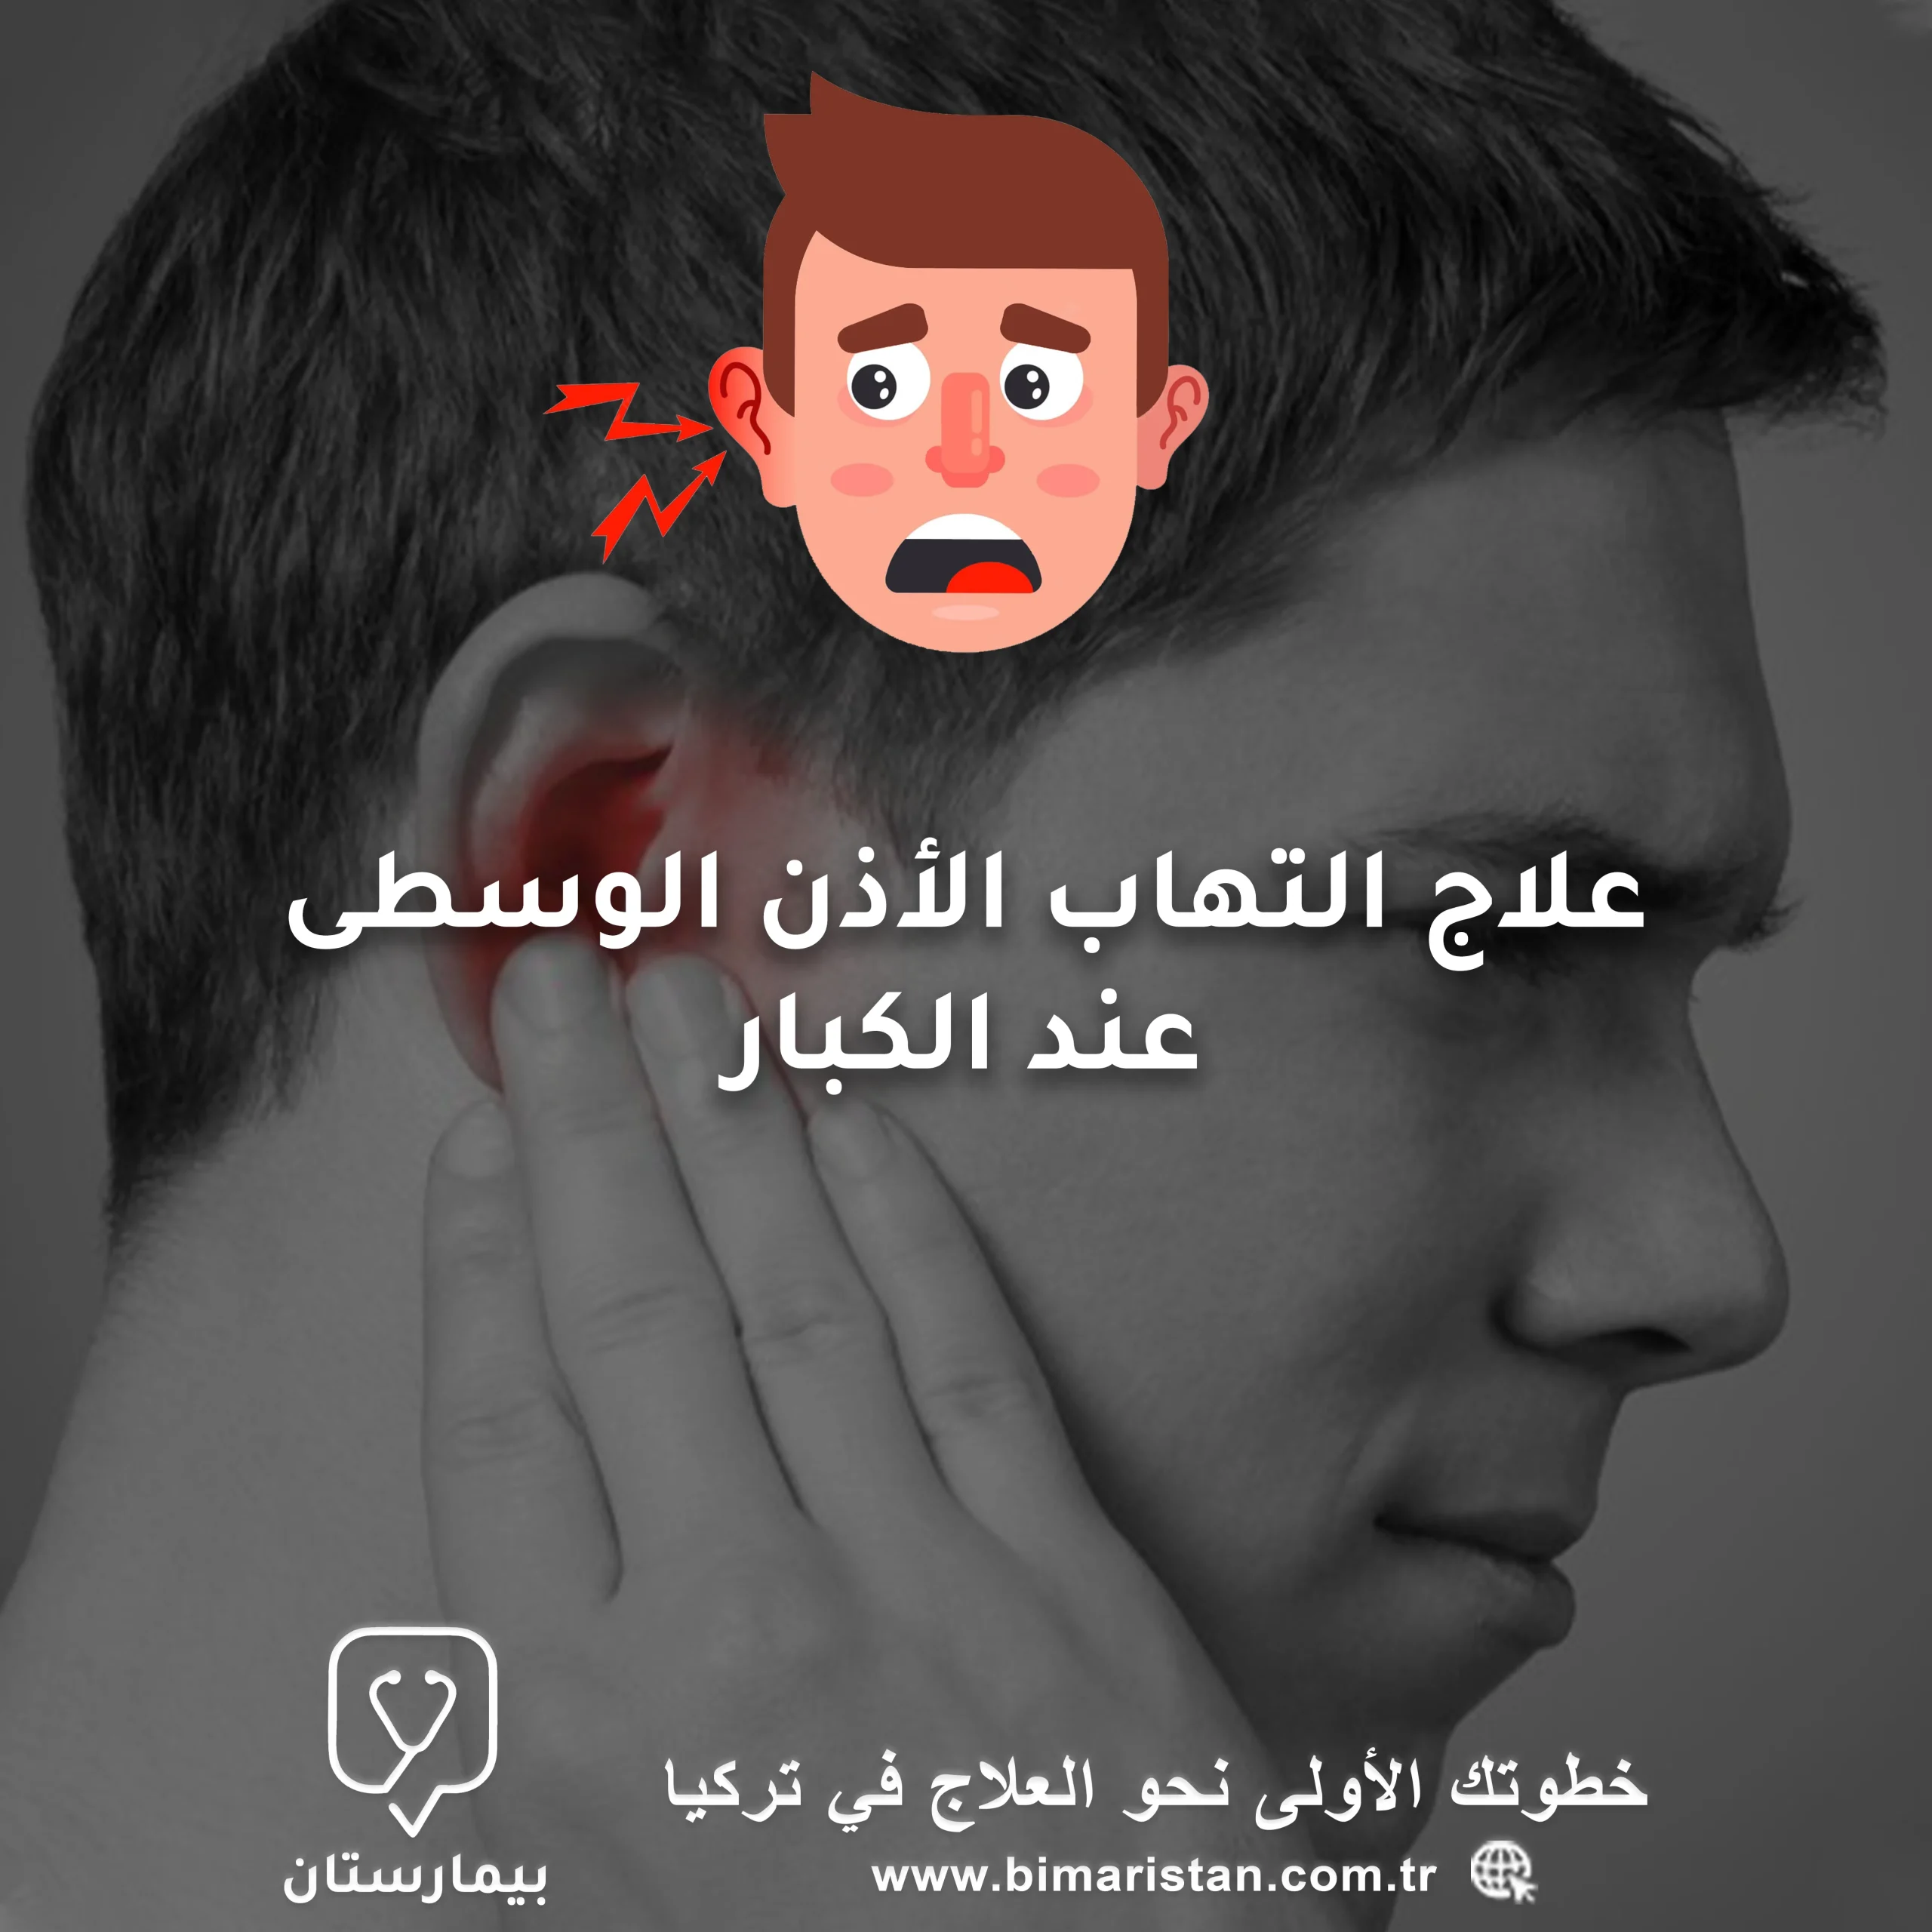 Symptoms of otitis media for adults and how to treat it